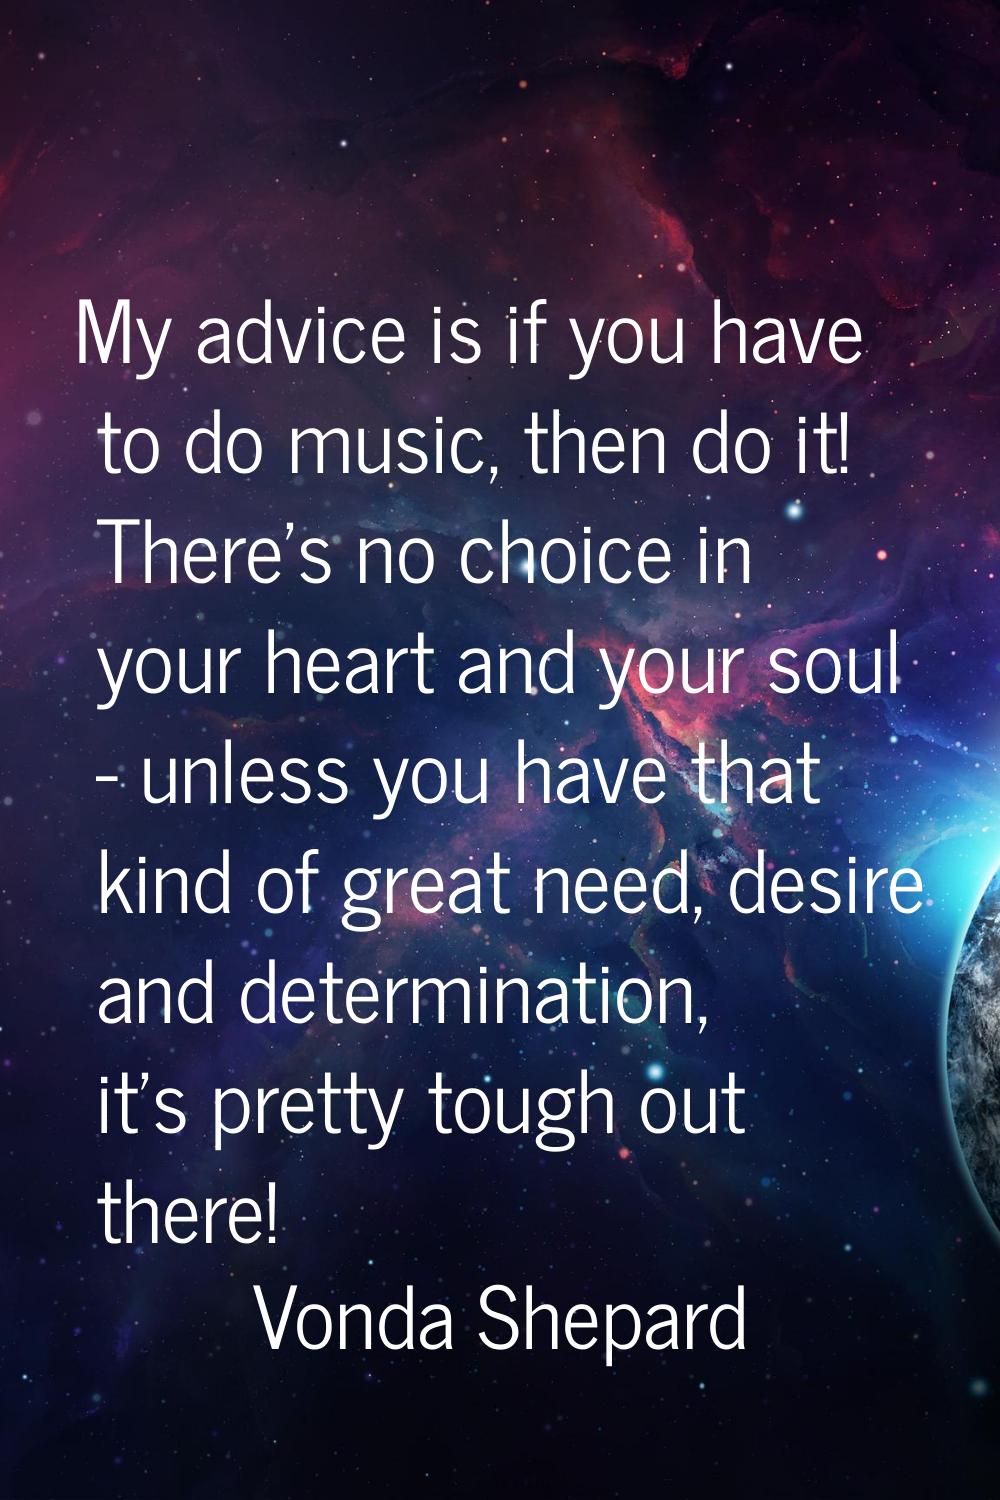 My advice is if you have to do music, then do it! There's no choice in your heart and your soul - u